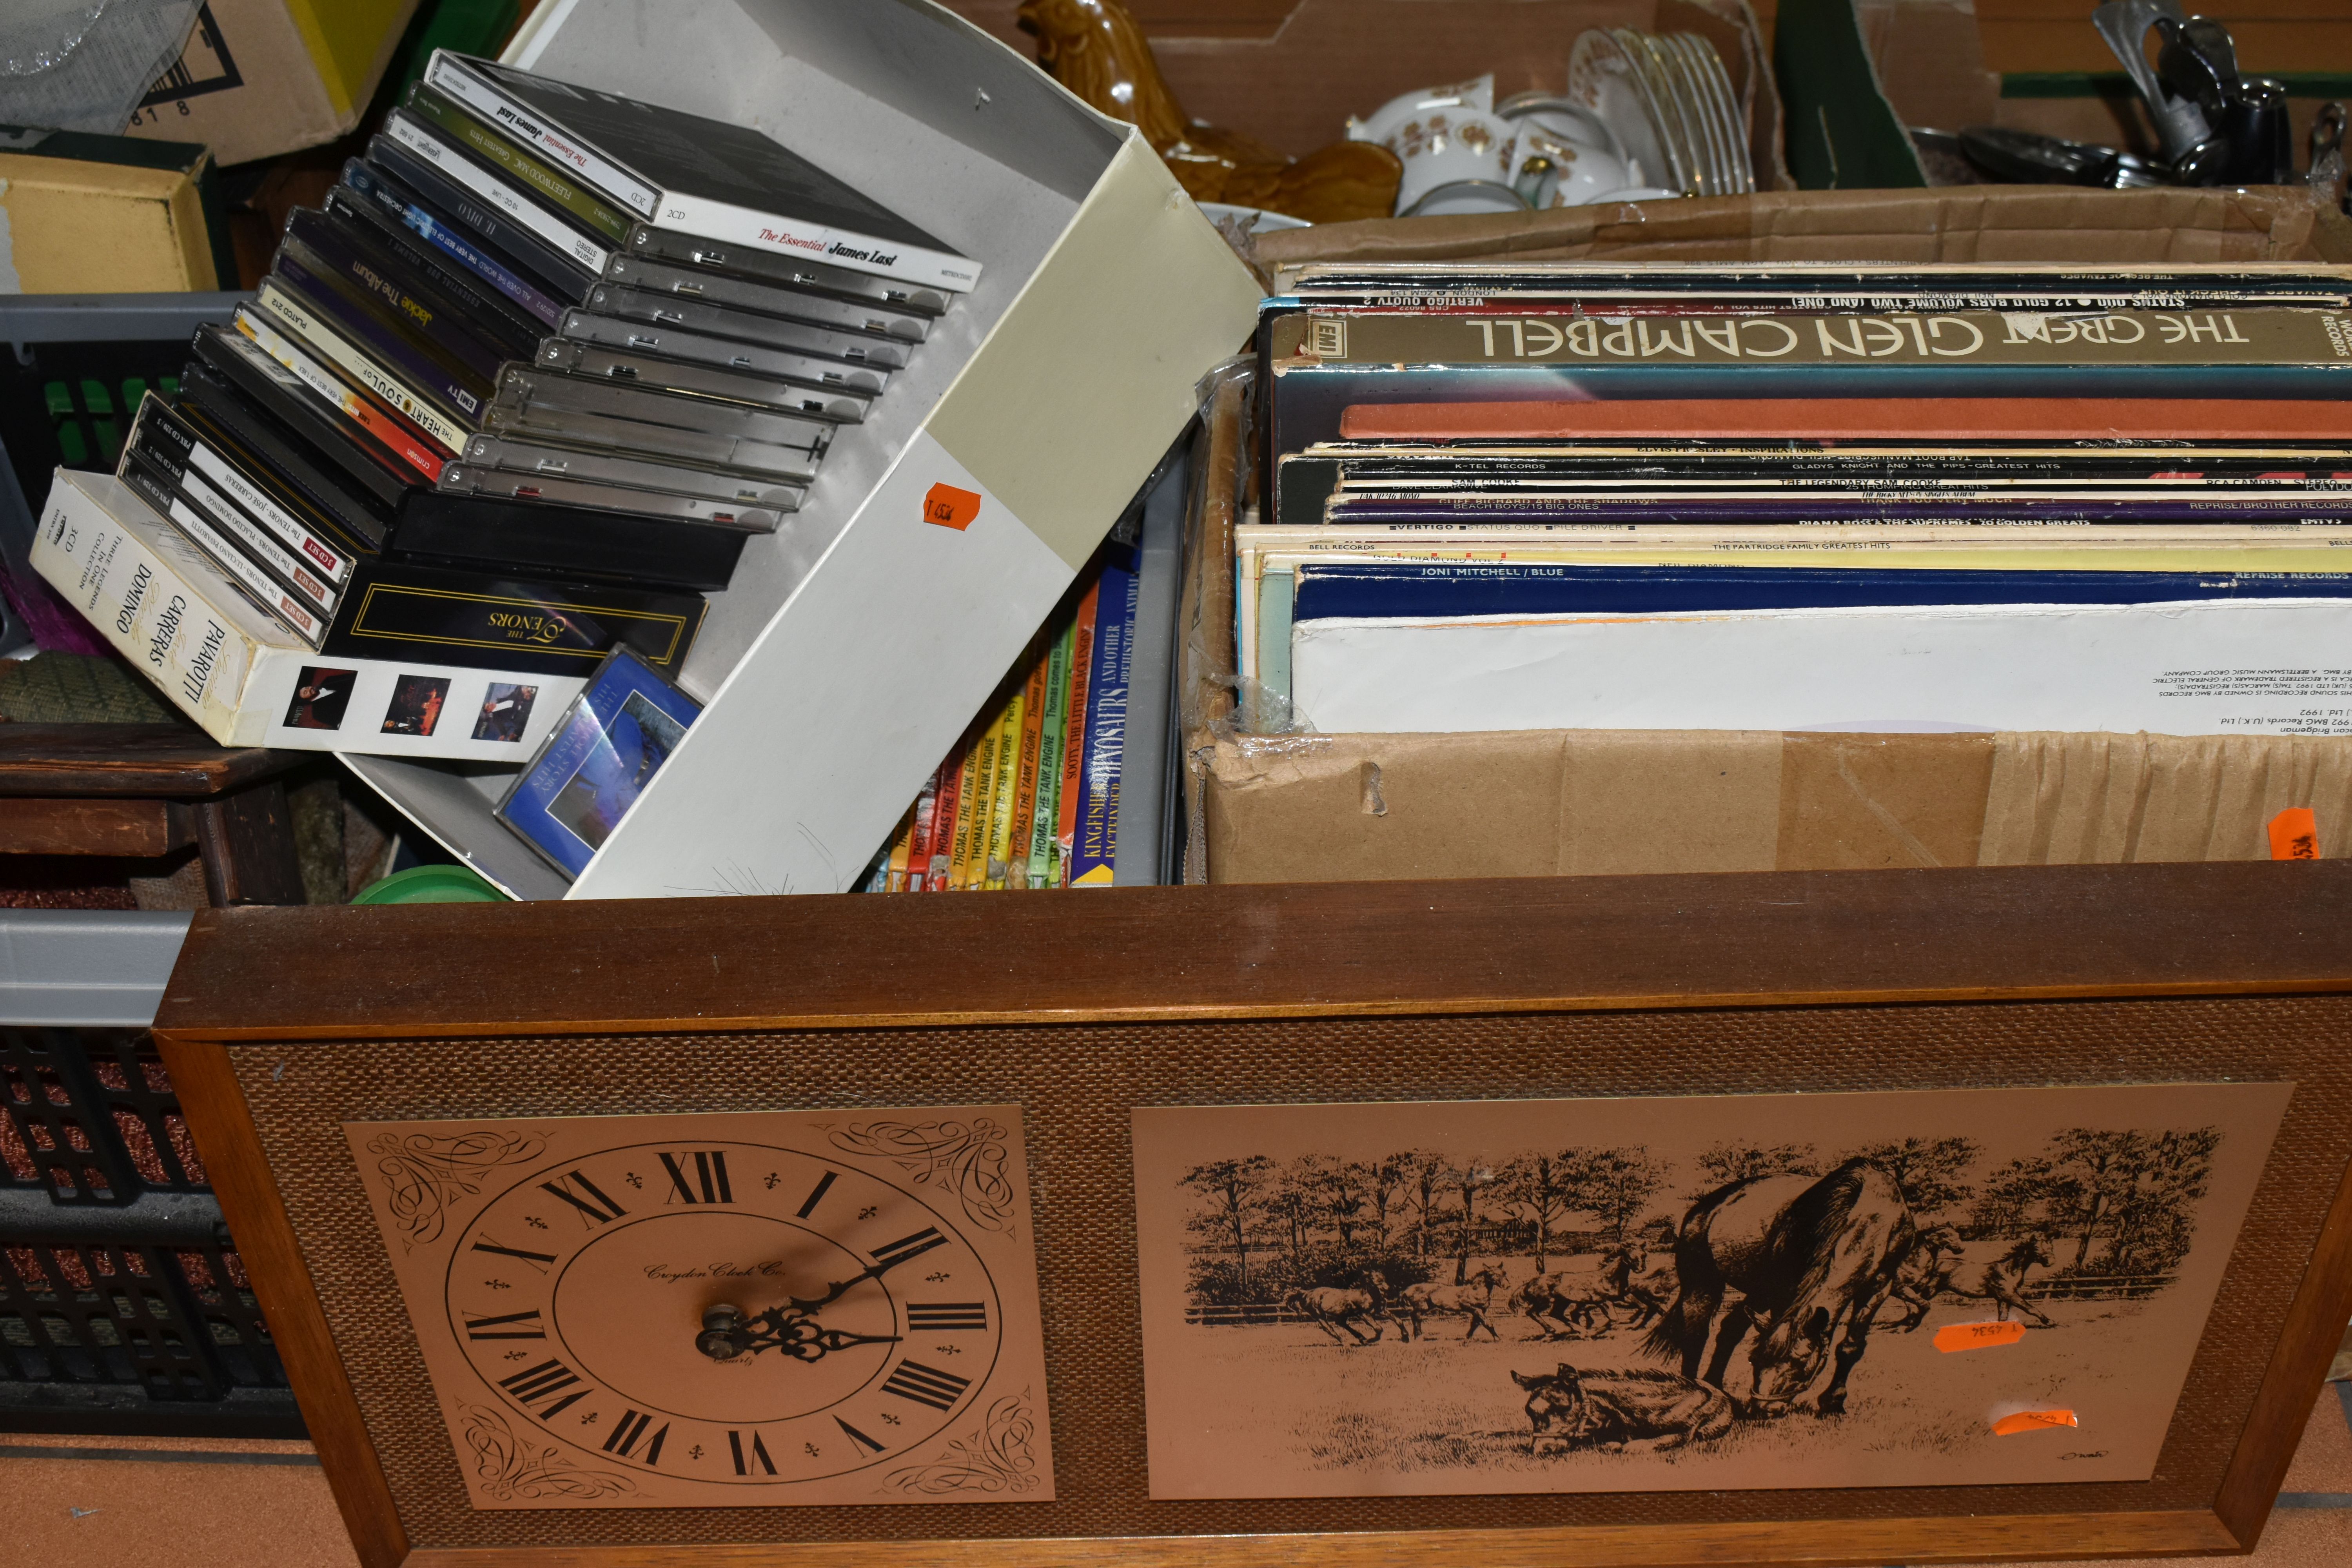 SIX BOXES AND LOOSE CERAMICS, GLASS, RECORDS, BOOKS AND SUNDRY ITEMS, to include over thirty LPs and - Image 10 of 10